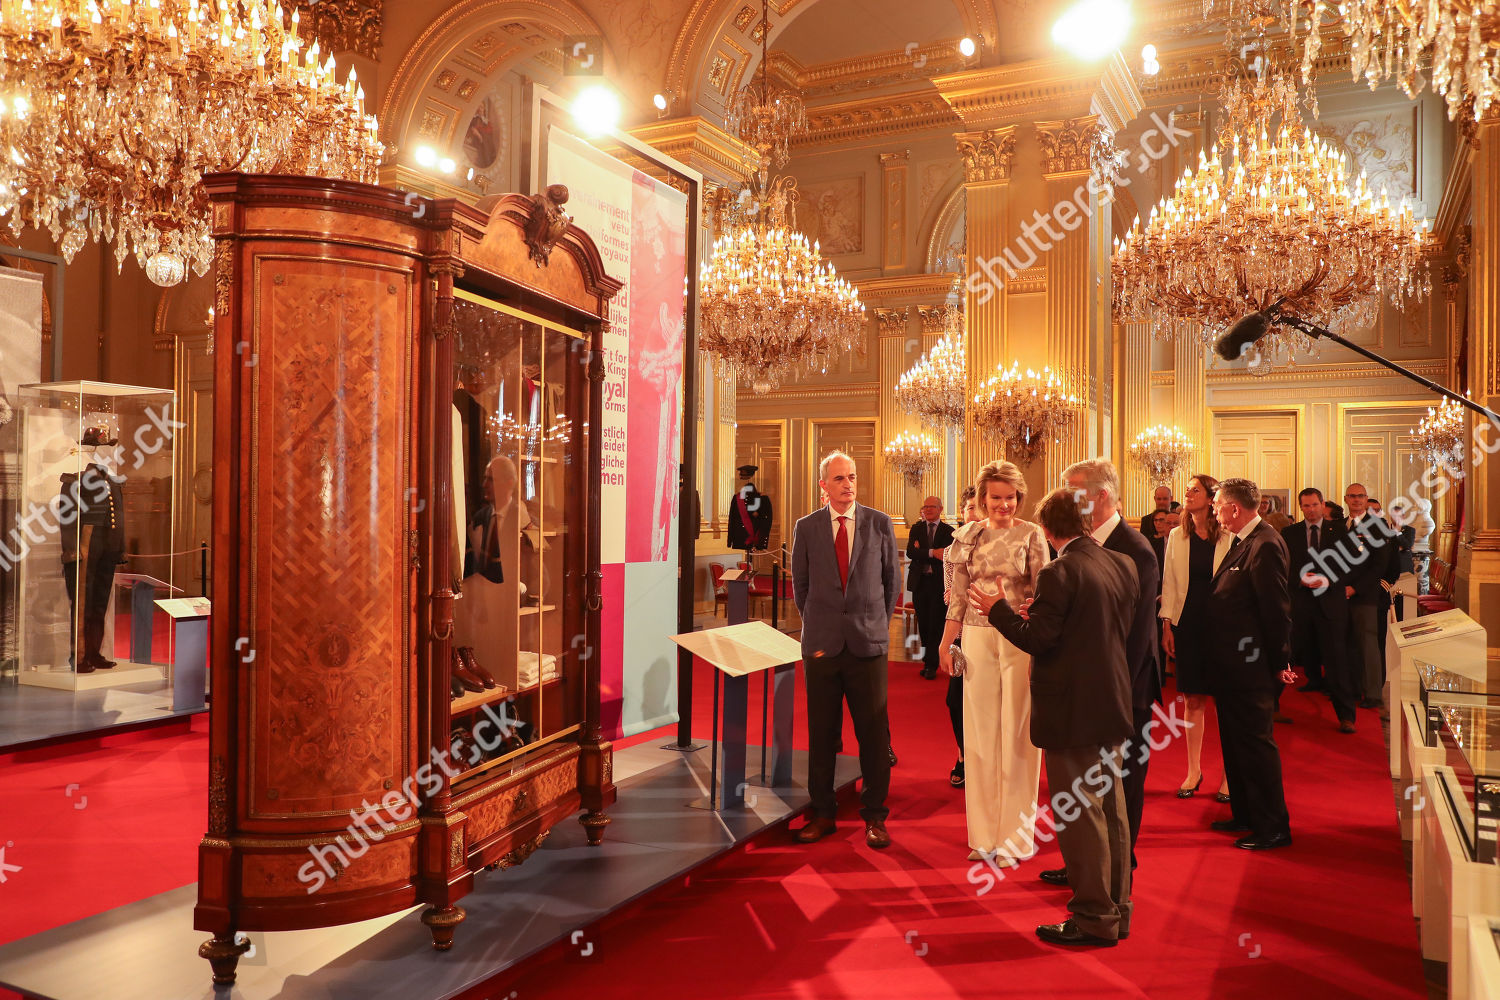 belgian-royals-summer-expo-at-the-royal-palace-brussels-belgium-shutterstock-editorial-10340779m.jpg